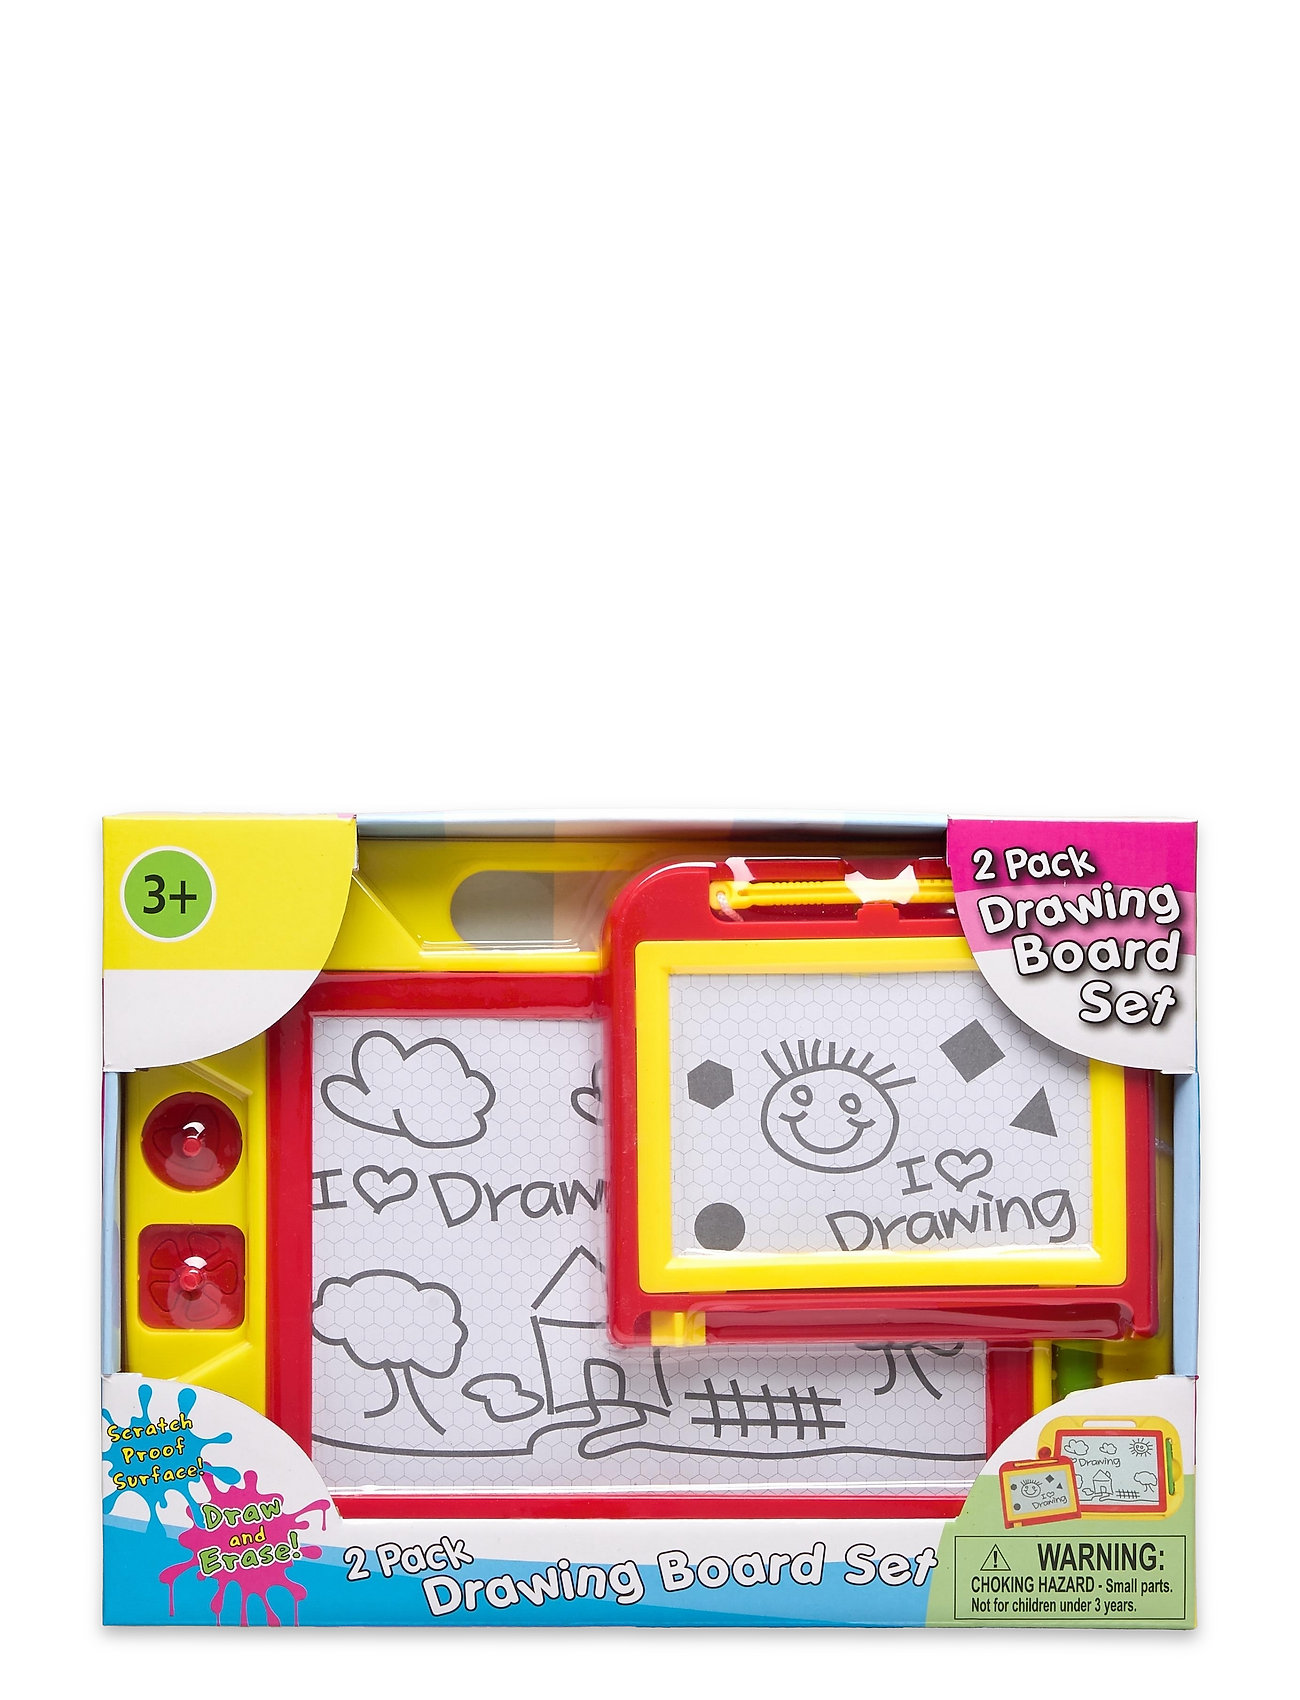 Rittavla Magnet 2-Pack 31X22 & 16X14 Cm Toys Creativity Drawing & Crafts Drawing Drawing Boards Multi/patterned Suntoy